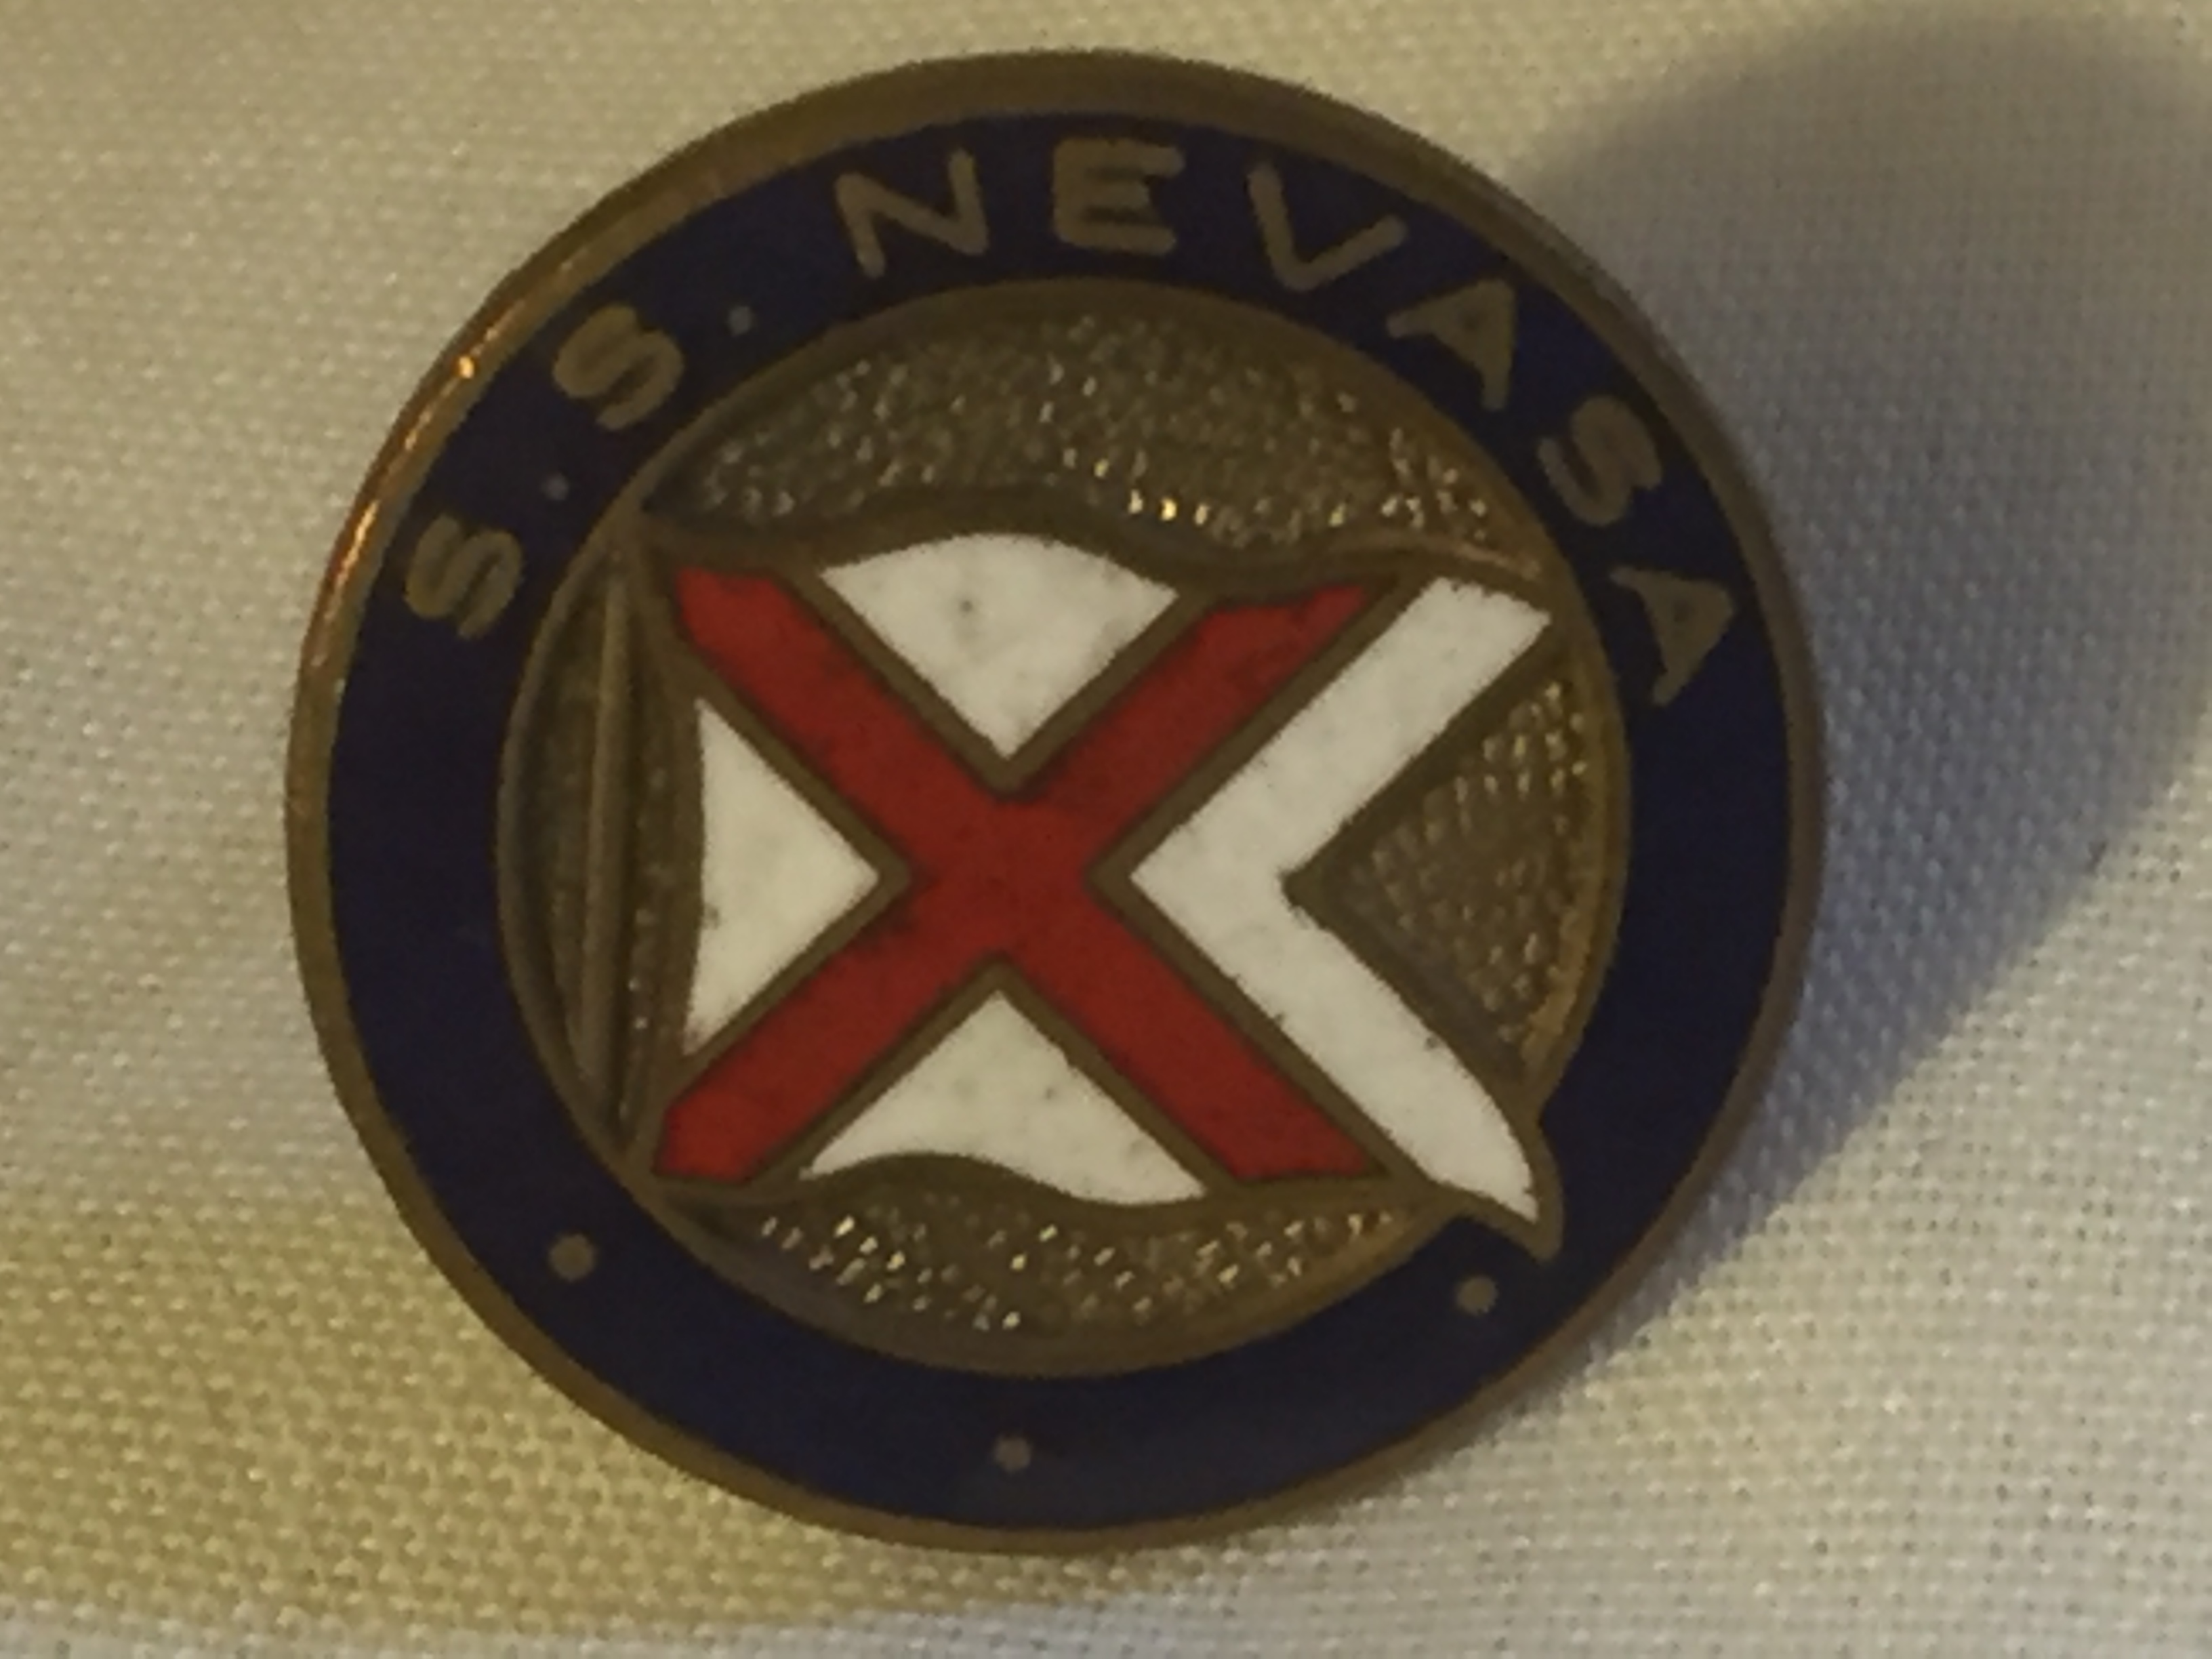 LAPEL PIN BADGE FROM THE VESSEL THE SS NEVASA OF THE BRITISH INDIA STEAM NAVIGATION COMPANY